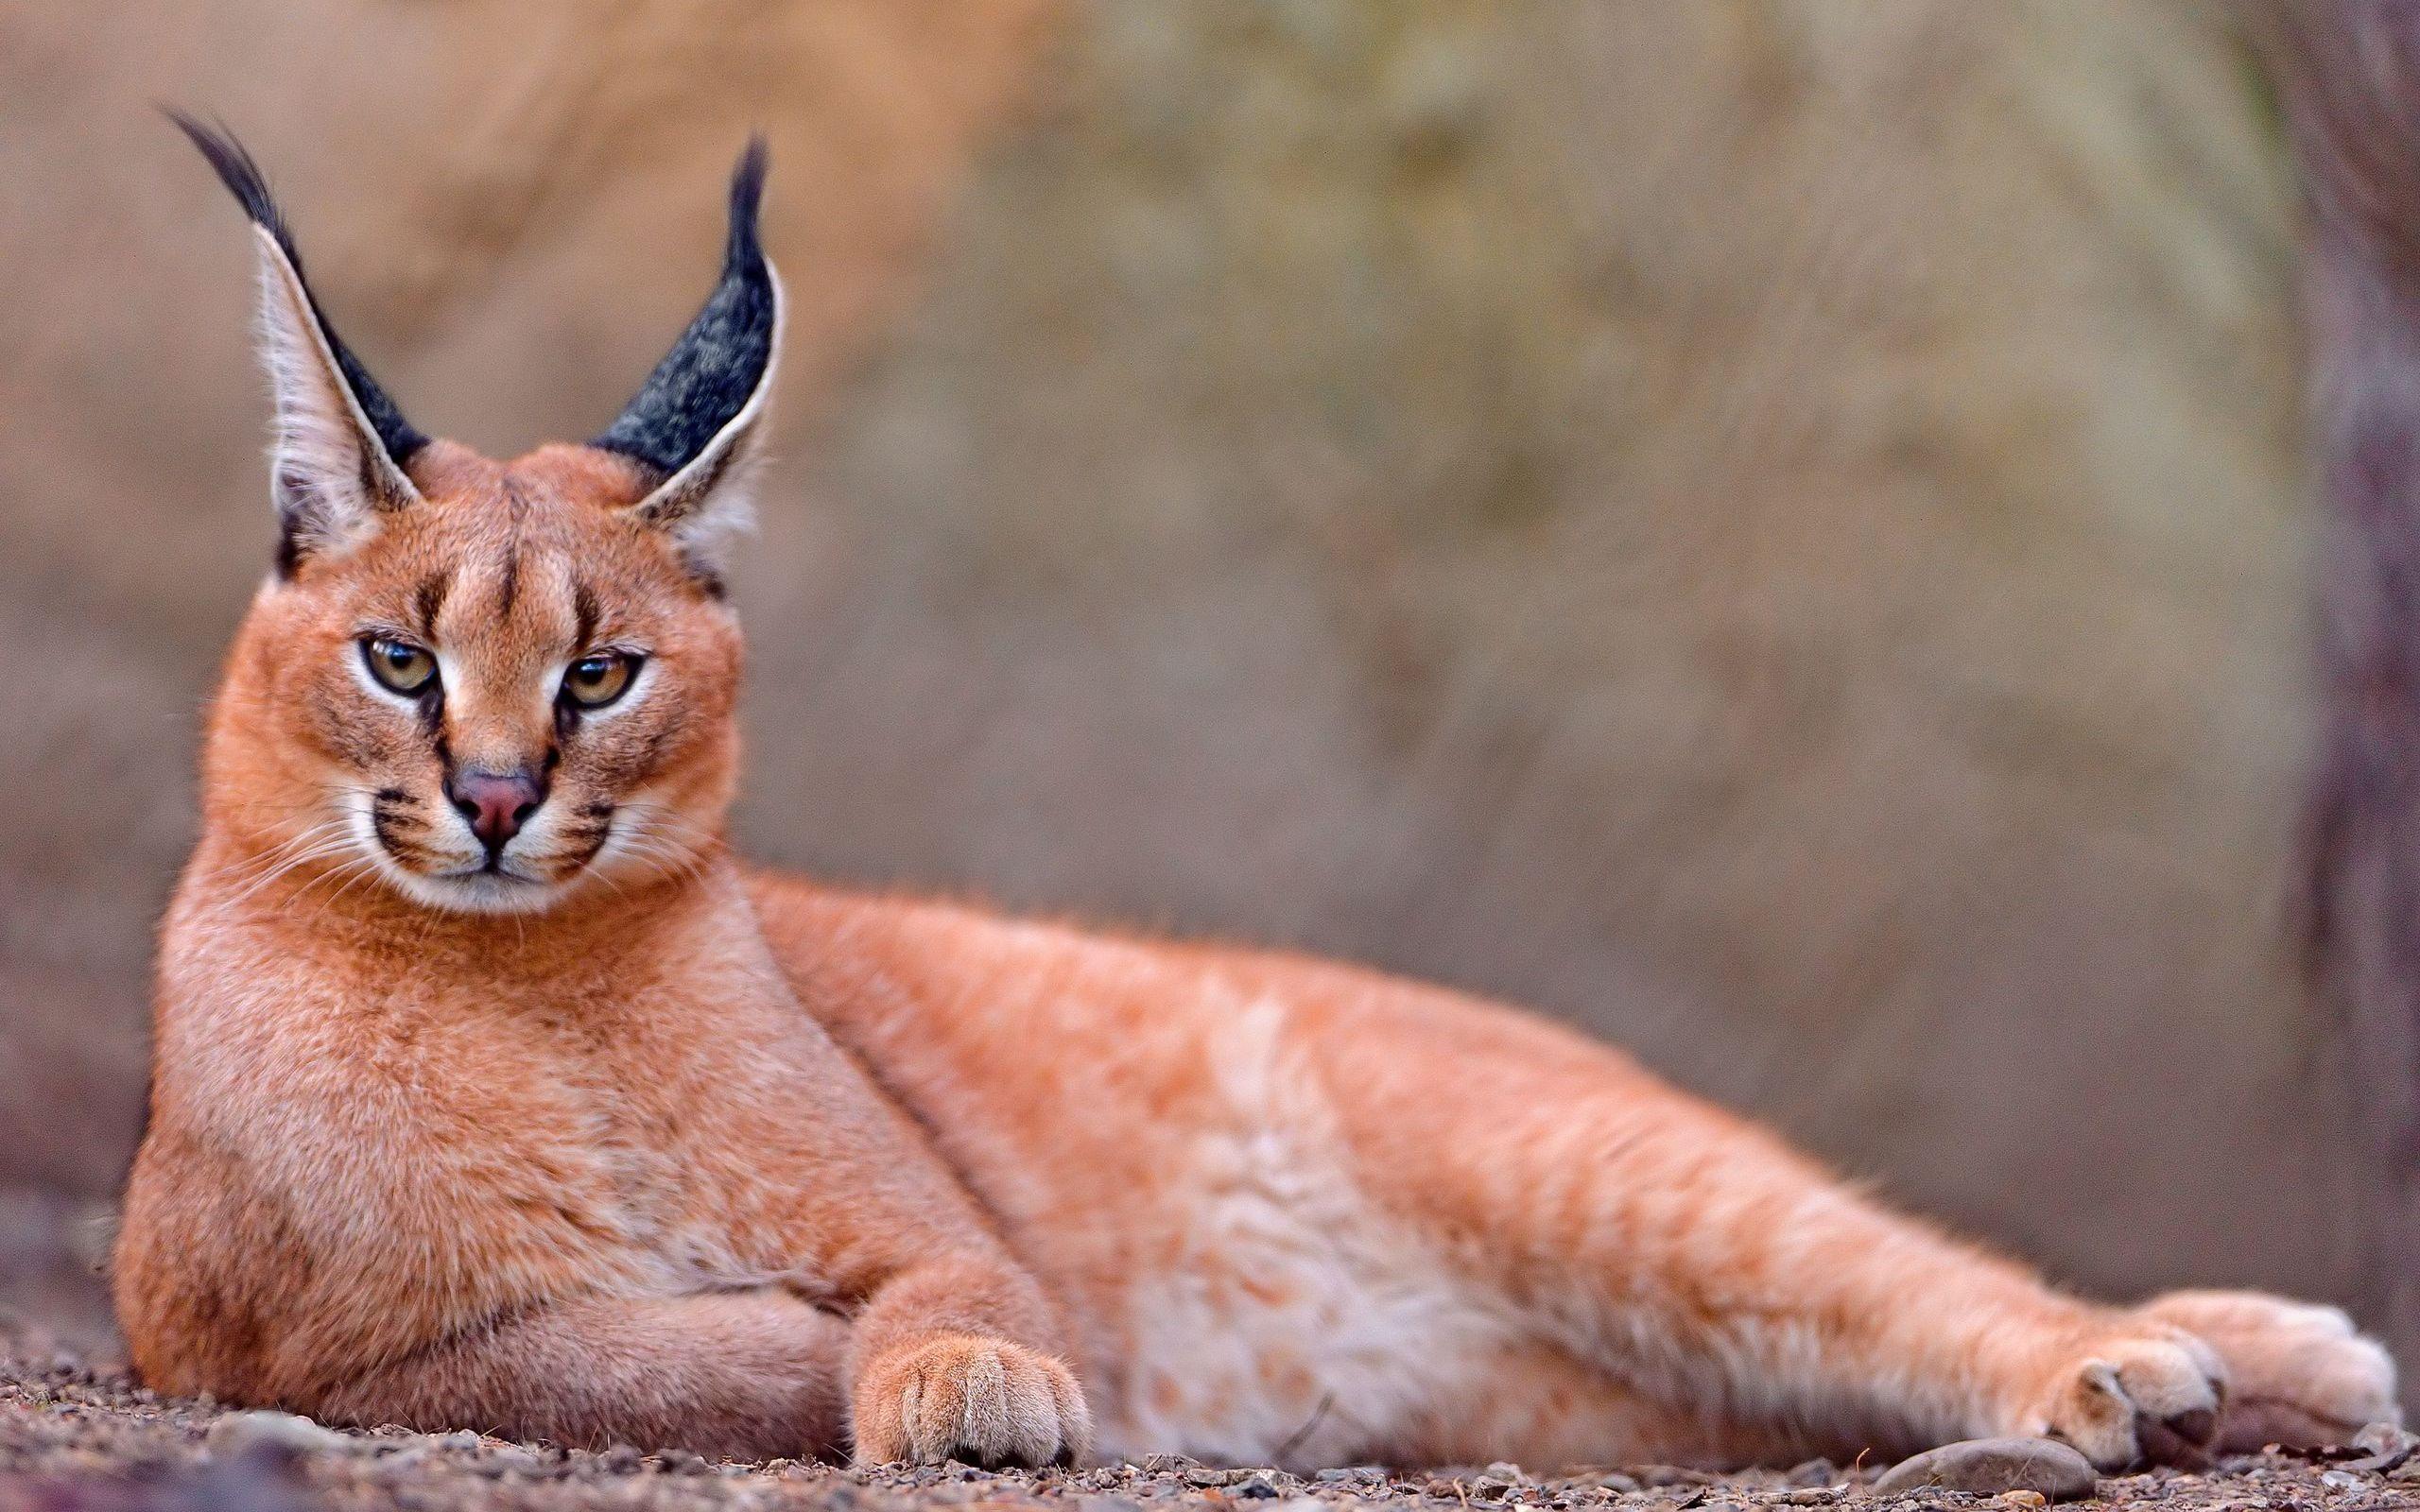 Caracal wallpaper and image, picture, photo